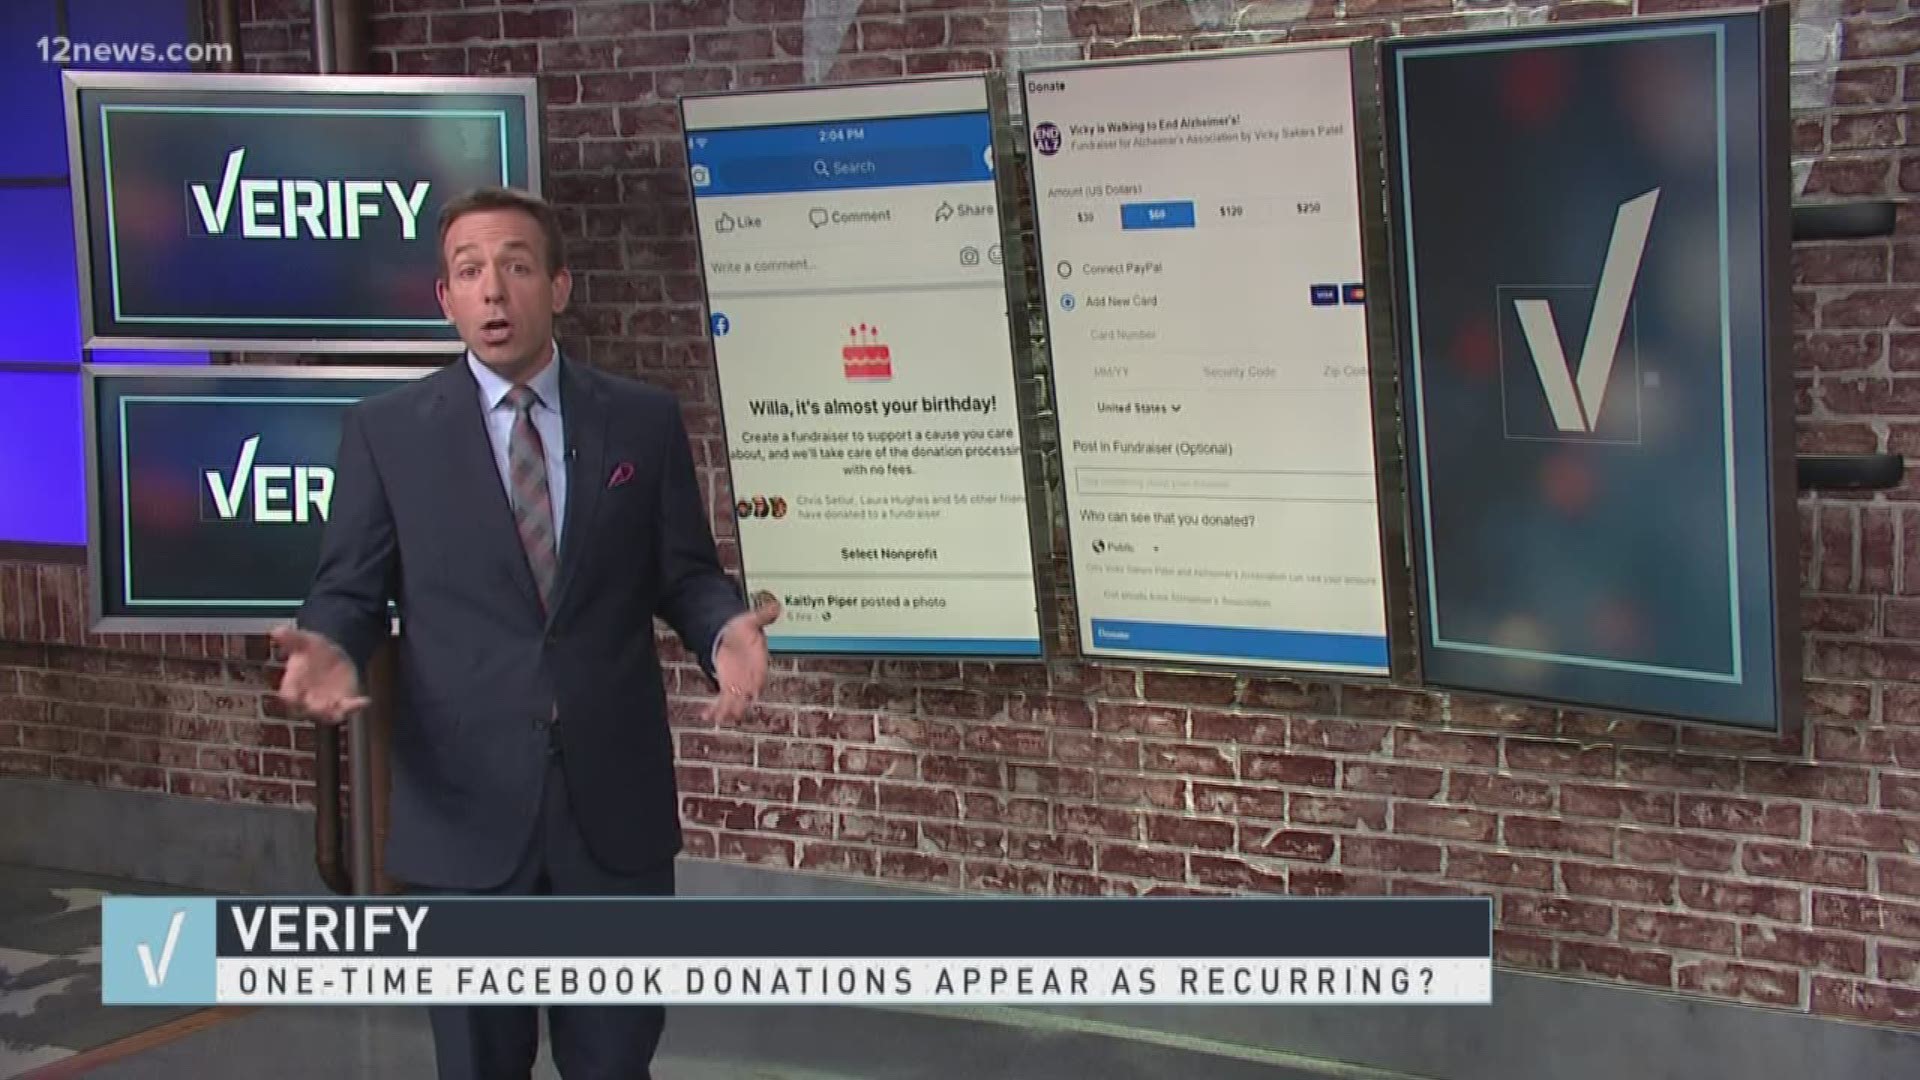 Facebook is making news for all the wrong reasons lately. The latest? Facebook scheduling recurring payments for people making charitable donations. We verify what is going on with the social media giant.